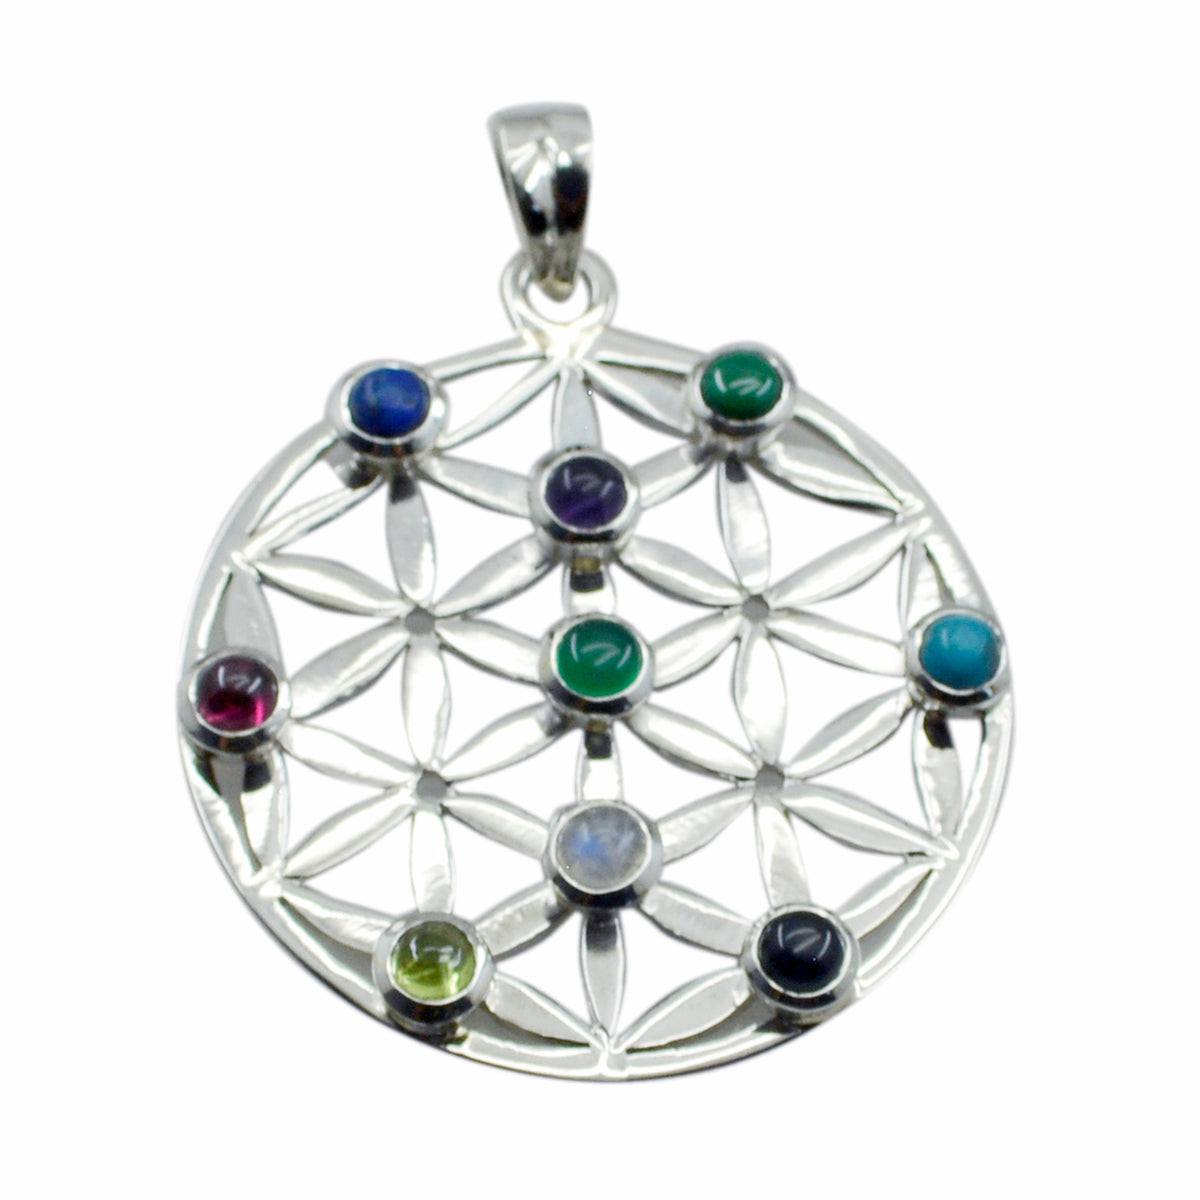 Riyo Real Gems Round Cabochon Multi Color Multi Stone Solid Silver Pendant Gift For Wedding